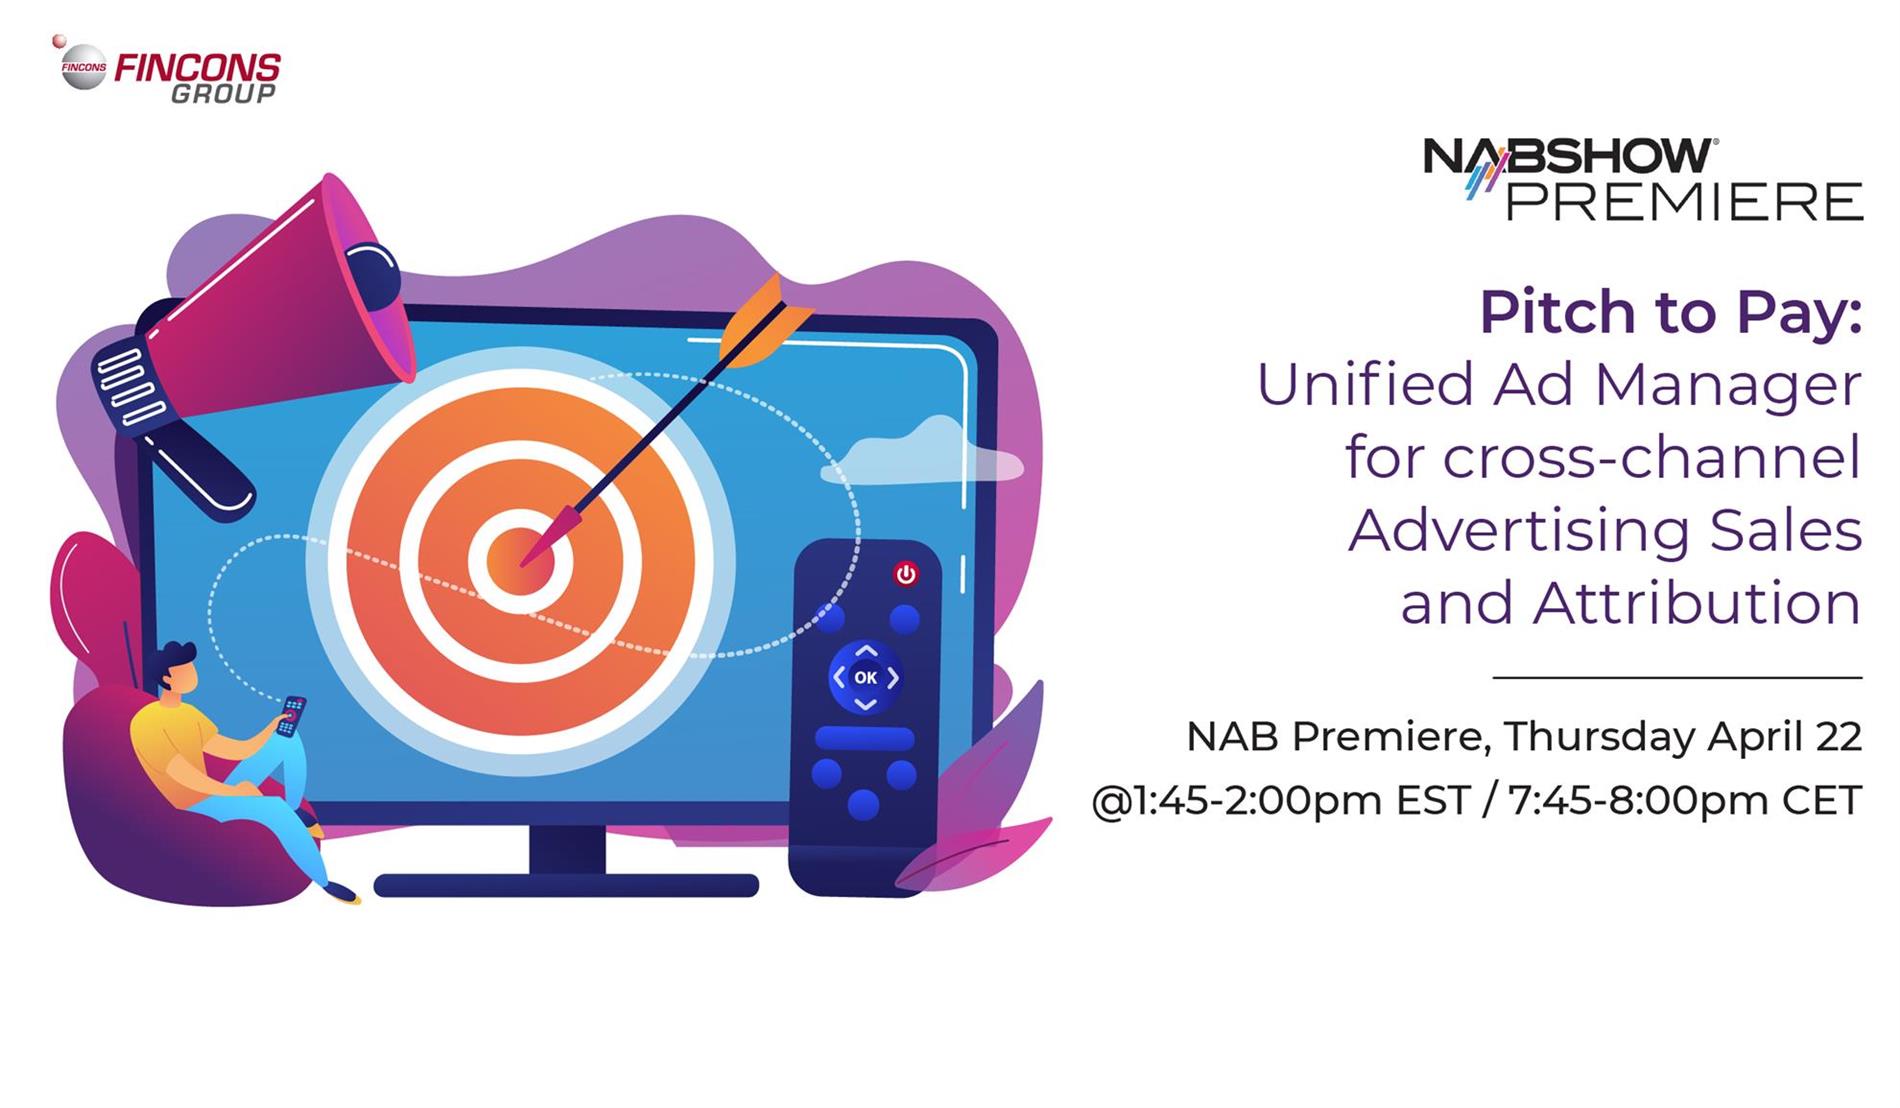 Unified Ad Manager presented at NAB Show Premiere